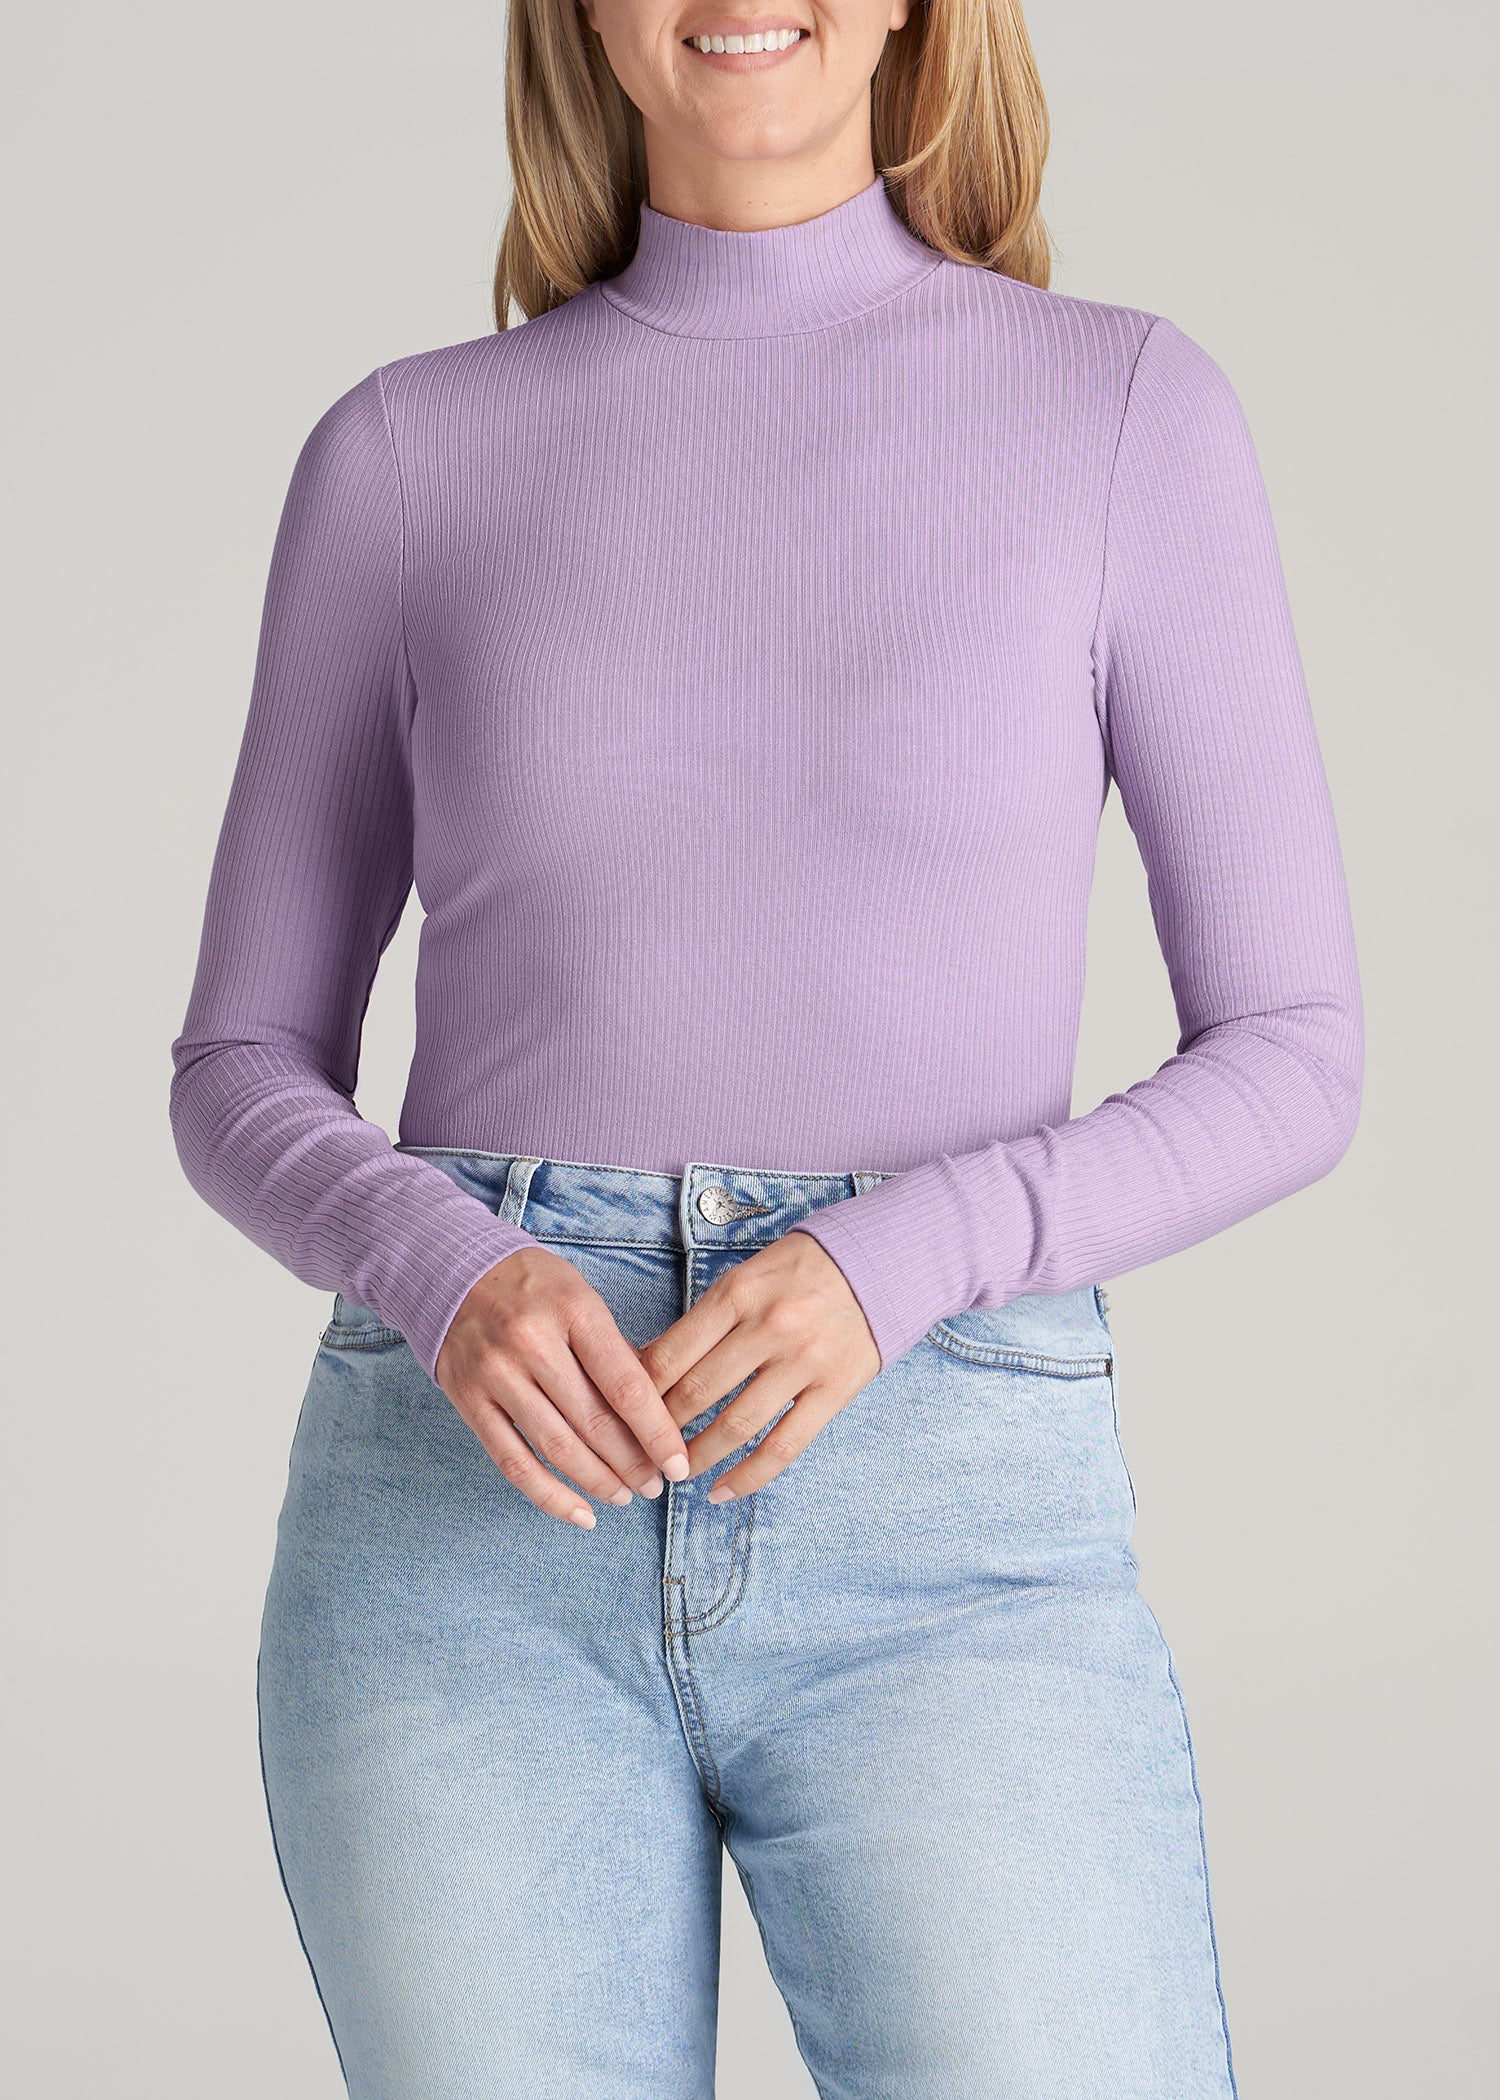 Long Sleeve Mock Neck Ribbed Top for Tall Women in Lavender Frost